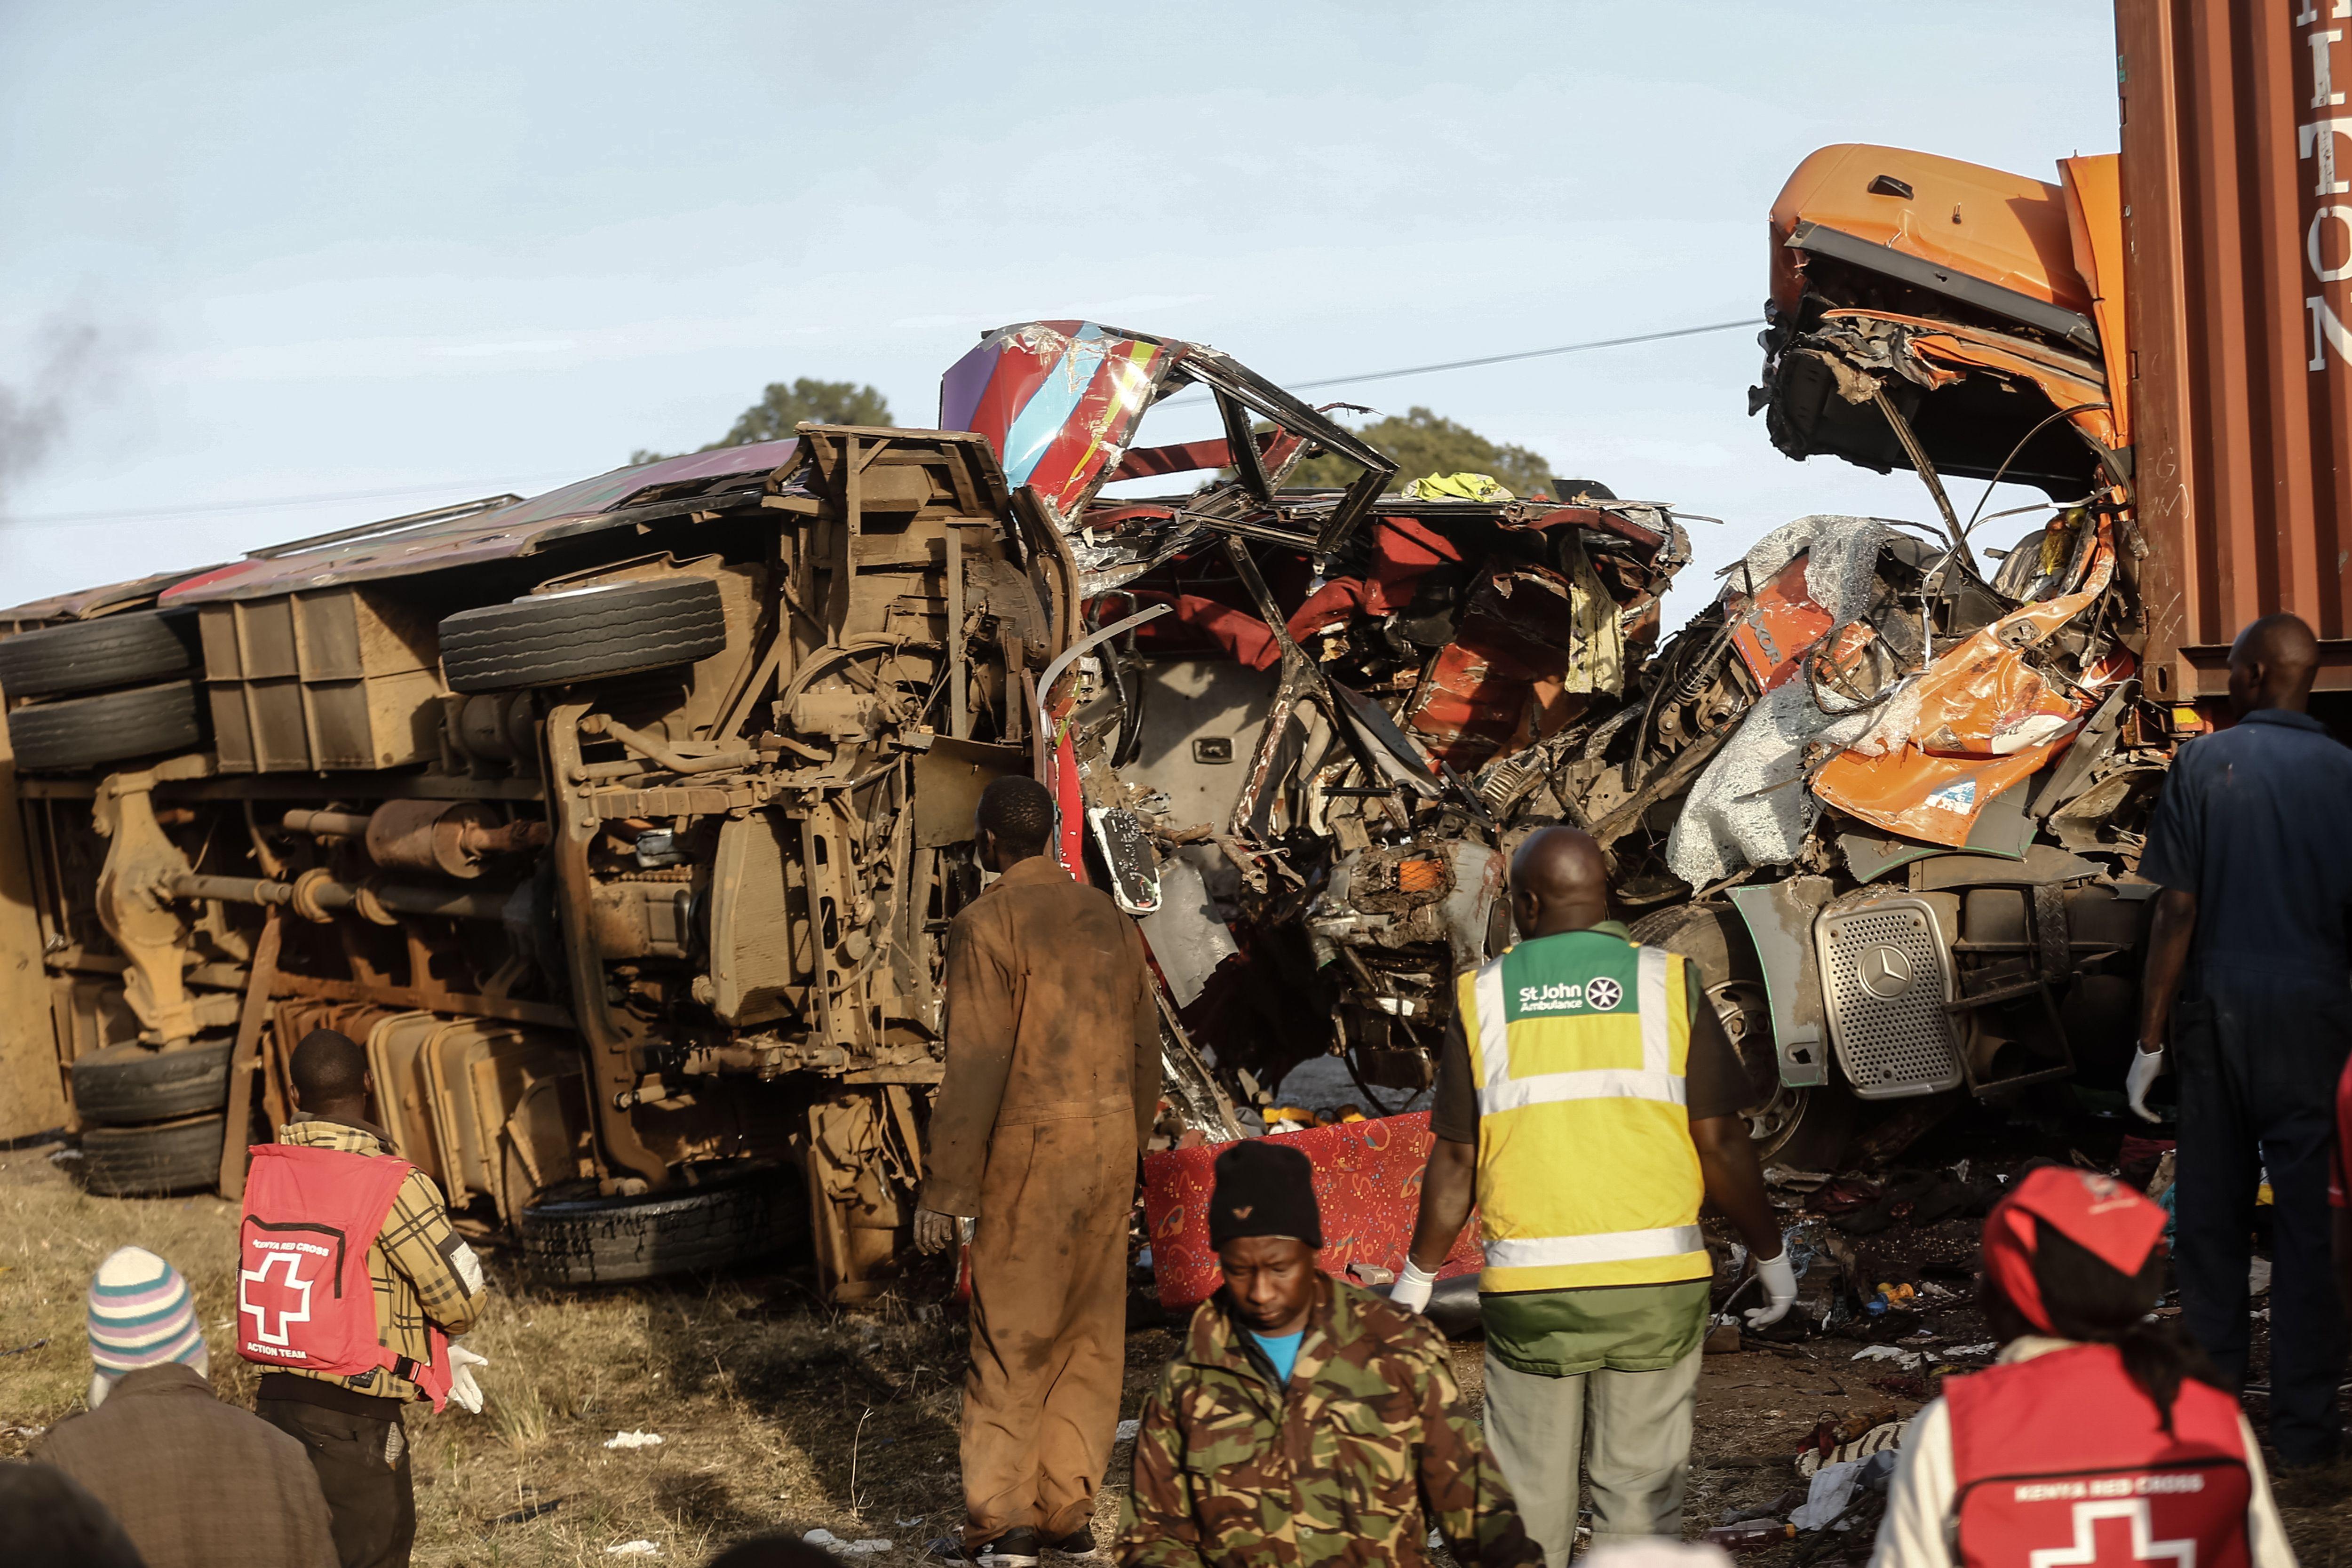 Crash between bus and truck in Kenya leaves at least 36 dead CBS News